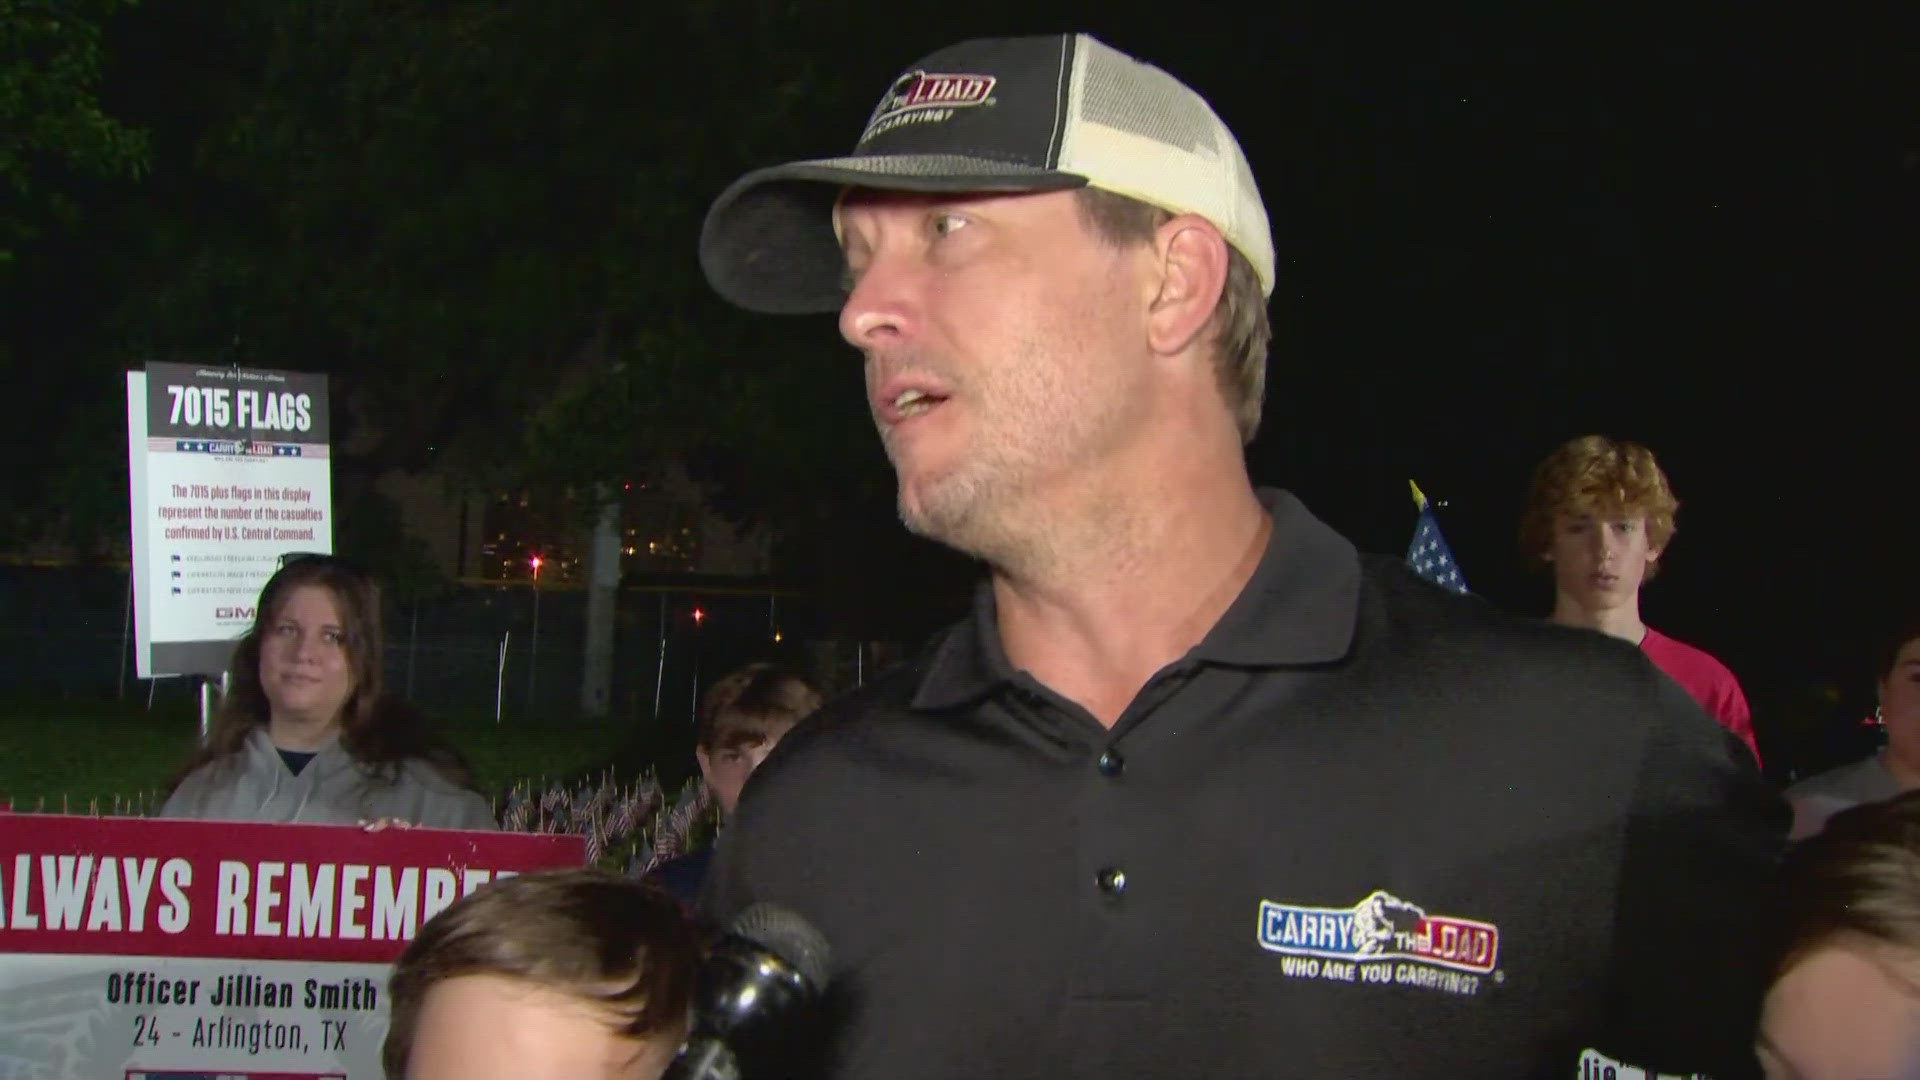 Chris Sadeghi talked with the organizers behind the annual Carry The Load event.